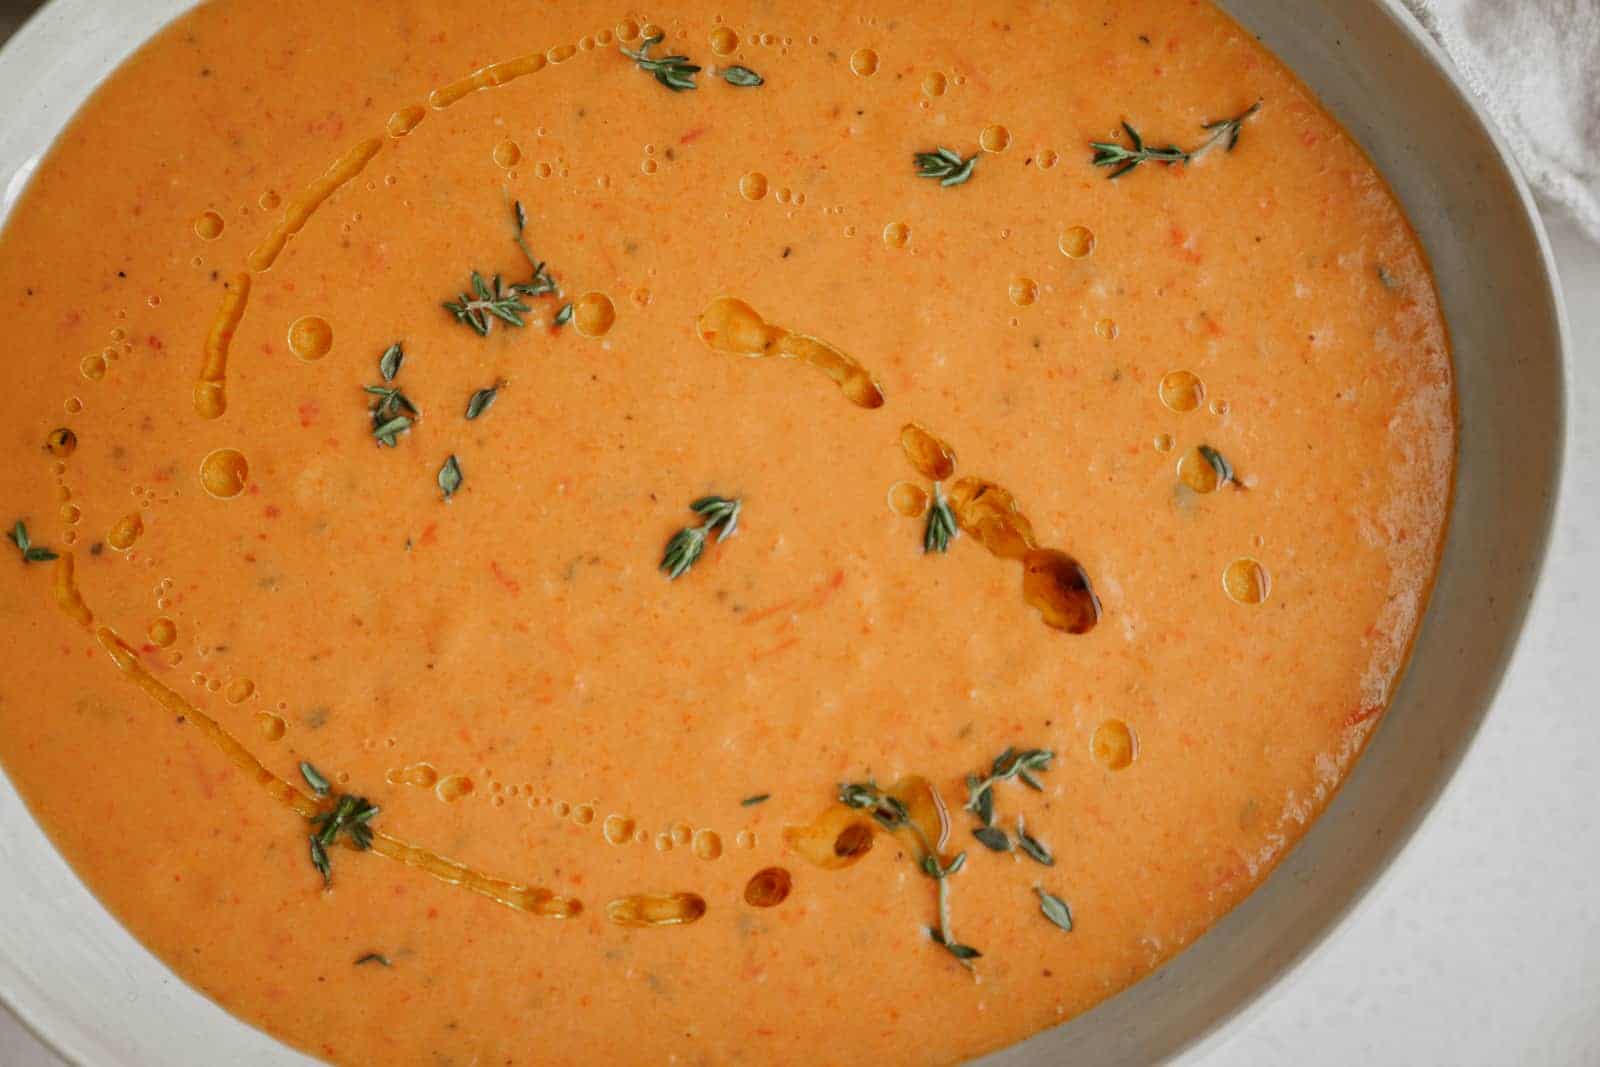 Big bowl of Roasted Red Pepper Soup on counter